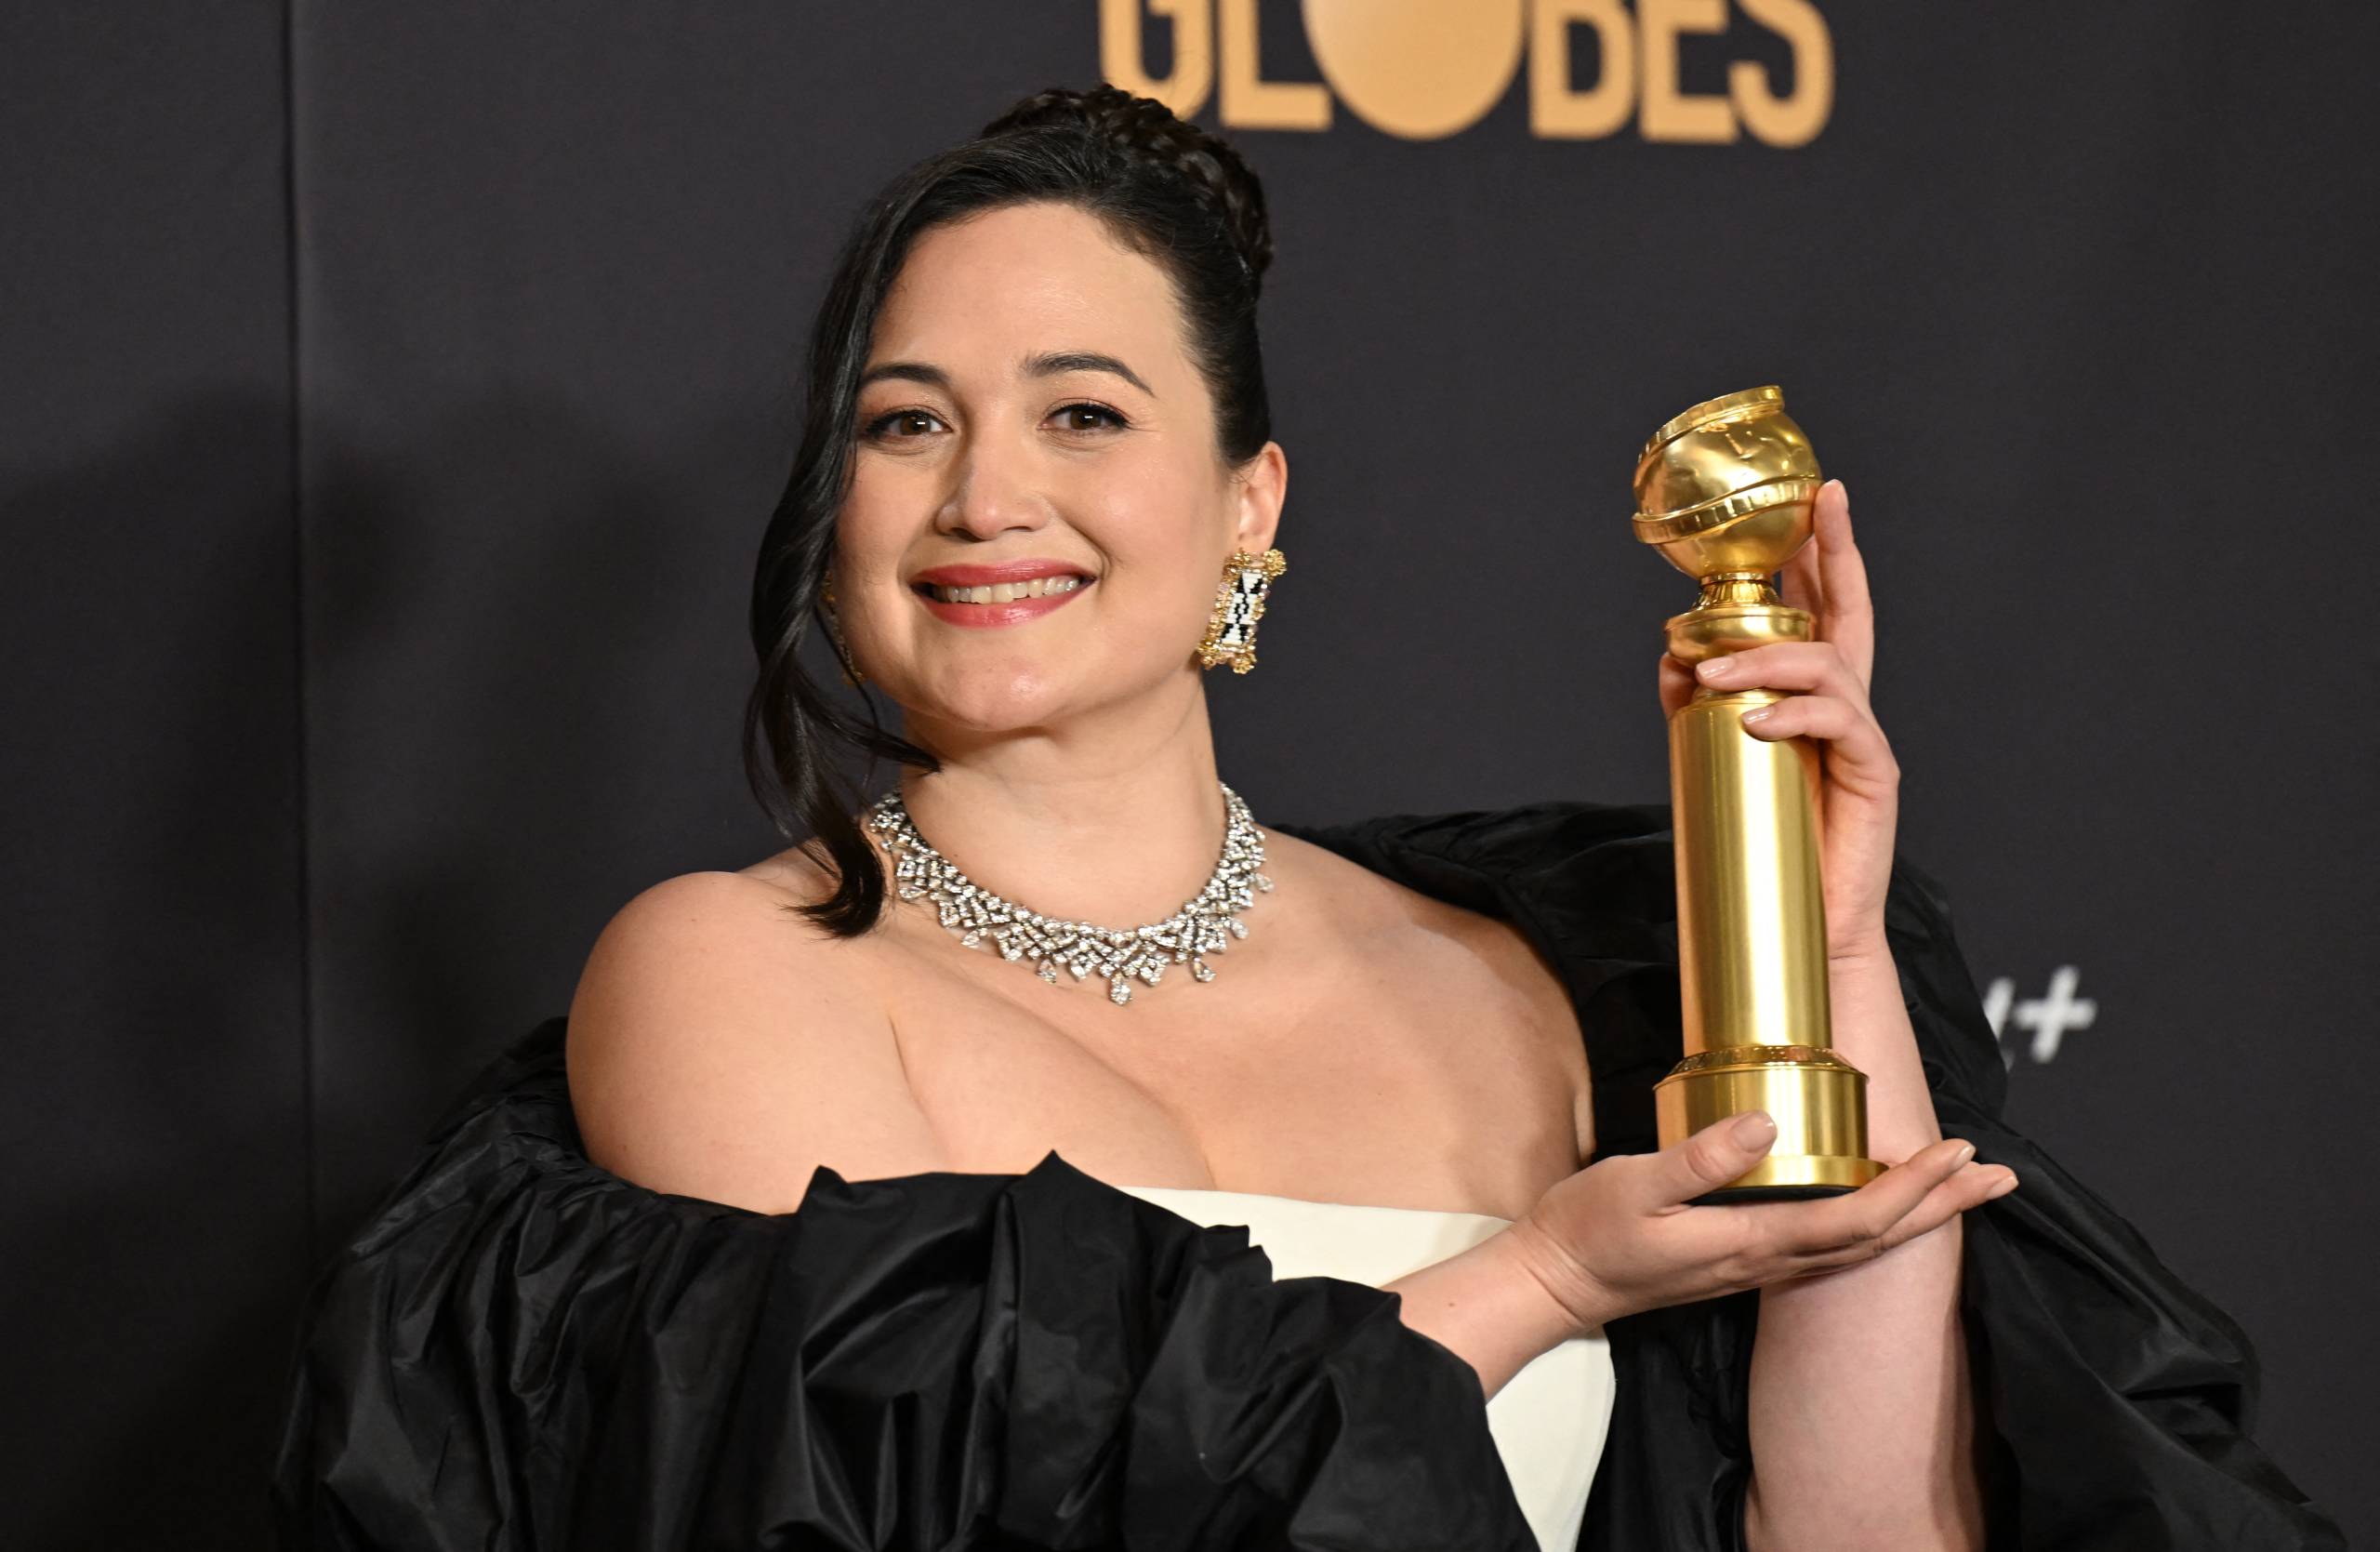 An Indigenous woman smiles and holds up a gold trophy. She is wearing a black and white gown.